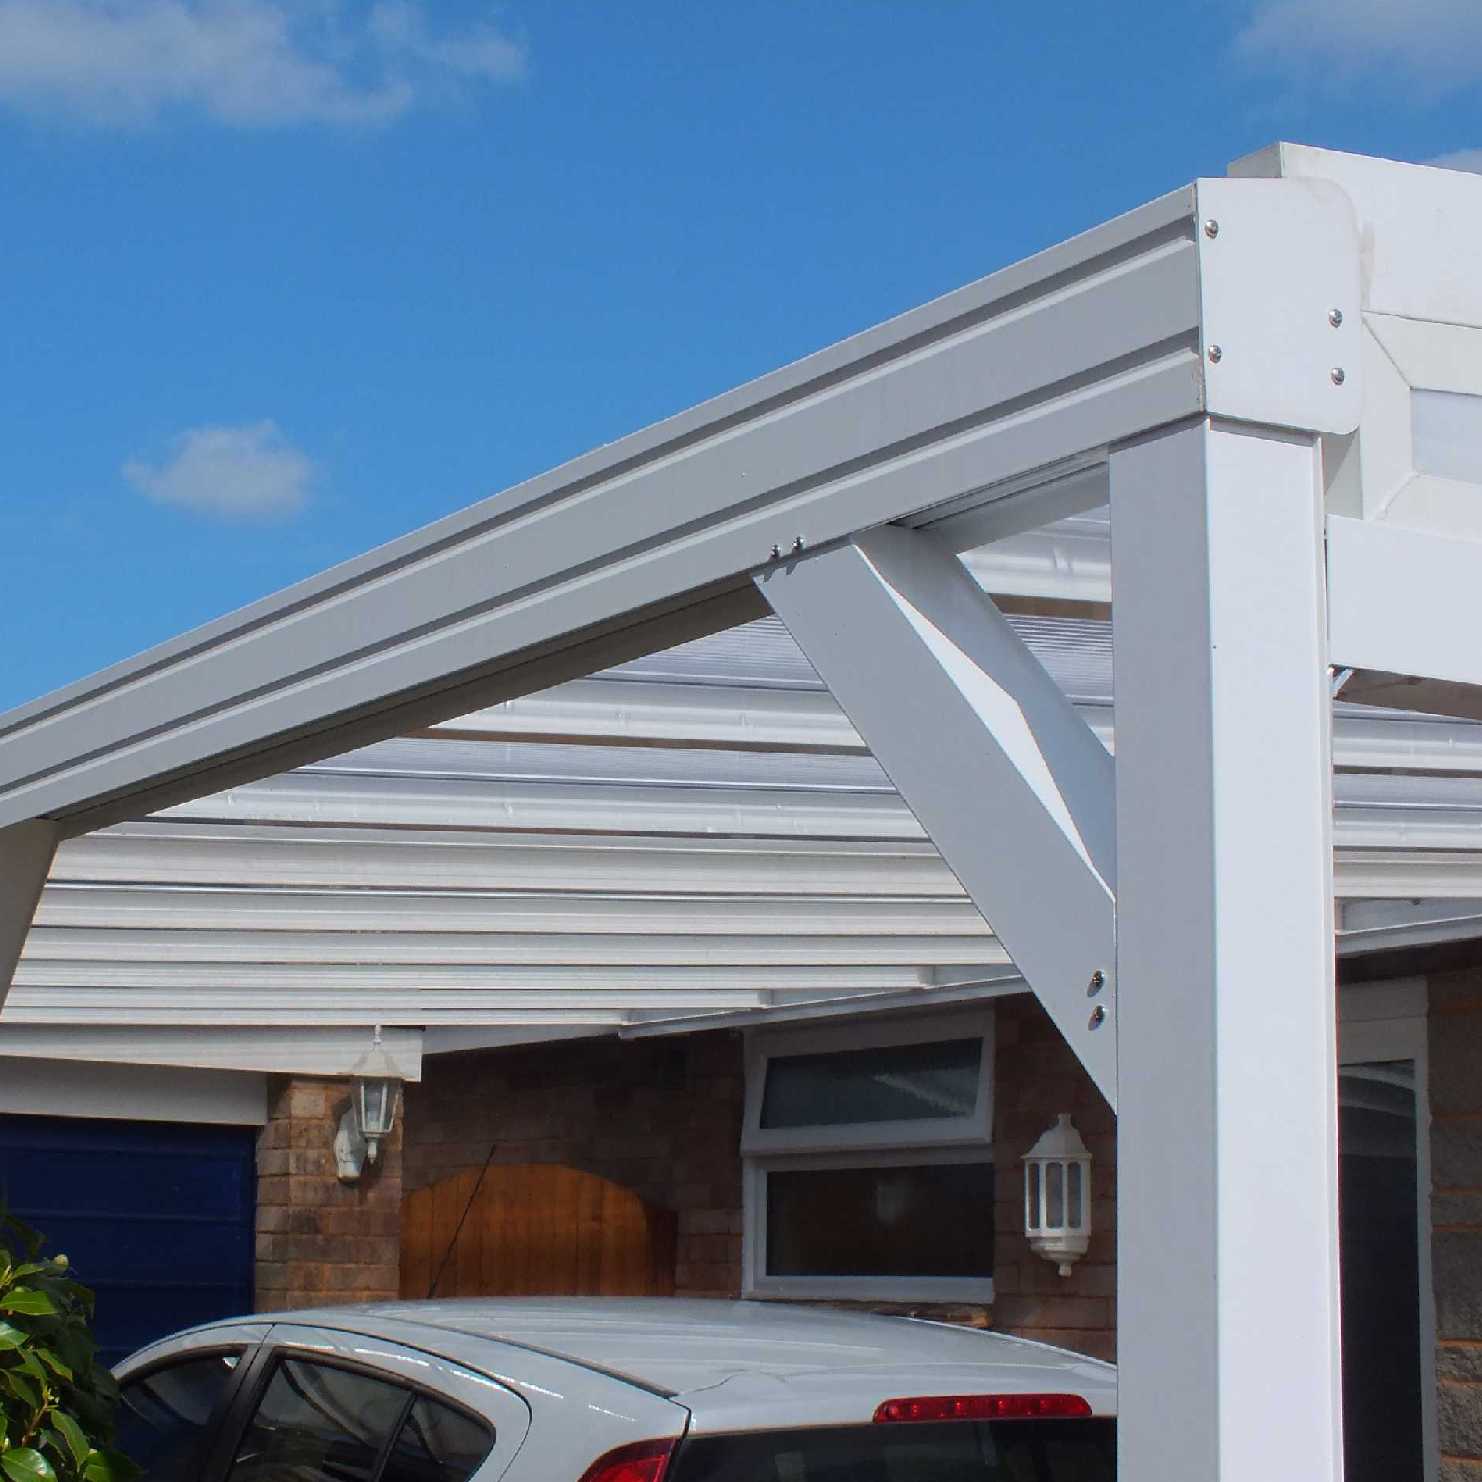 Buy Omega Smart Lean-To Canopy, White with 16mm Polycarbonate Glazing - 4.2m (W) x 2.0m (P), (3) Supporting Posts online today